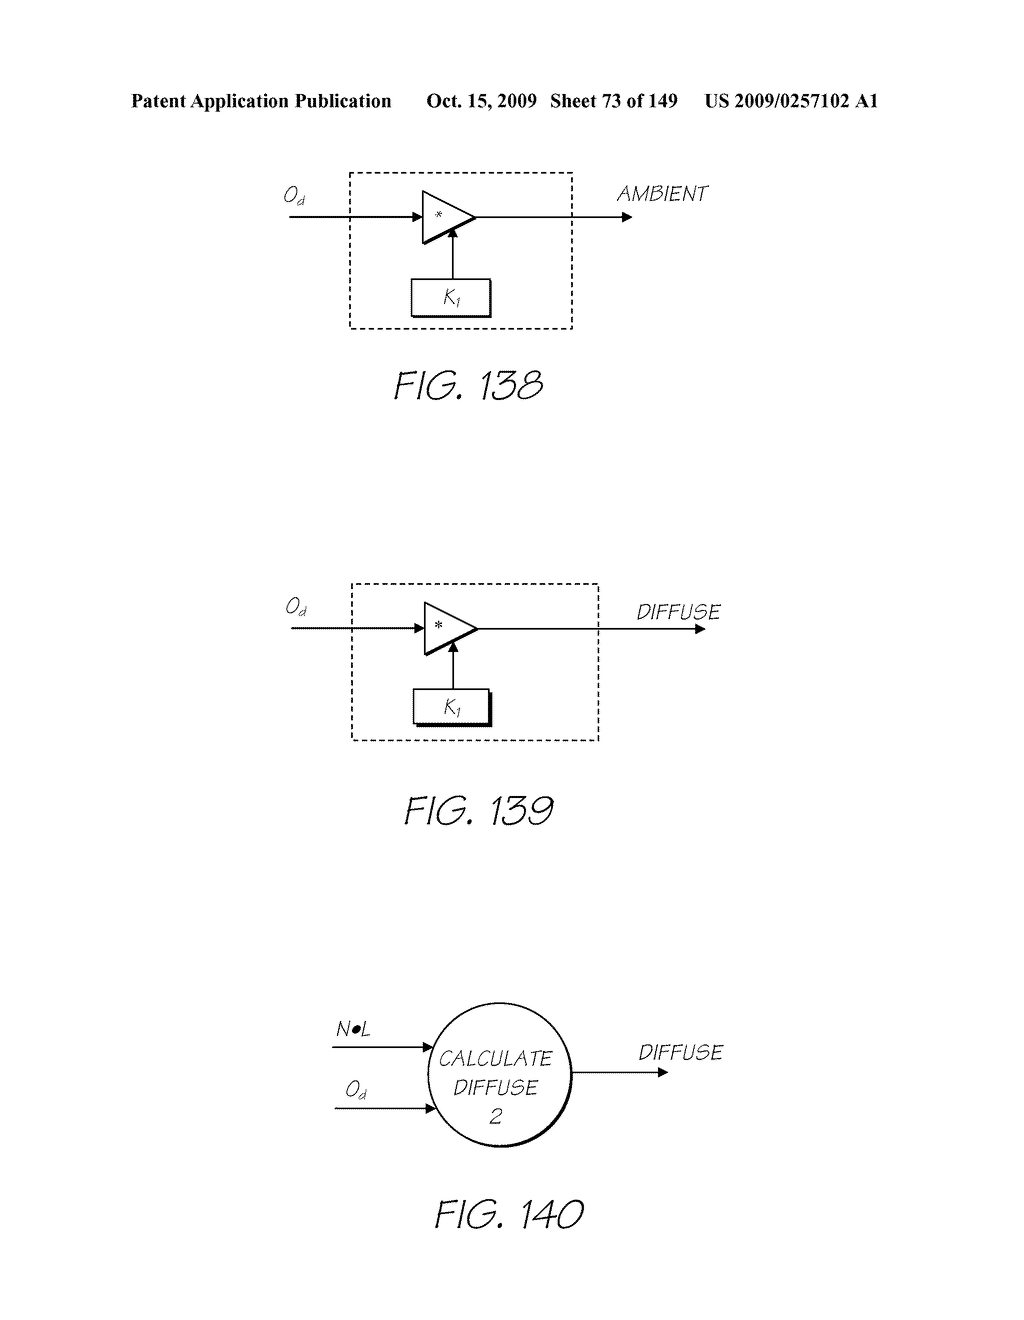 IMAGE PROCESSING APPARATUS HAVING CARD READER FOR APPLYING EFFECTS STORED ON A CARD TO A STORED IMAGE - diagram, schematic, and image 74